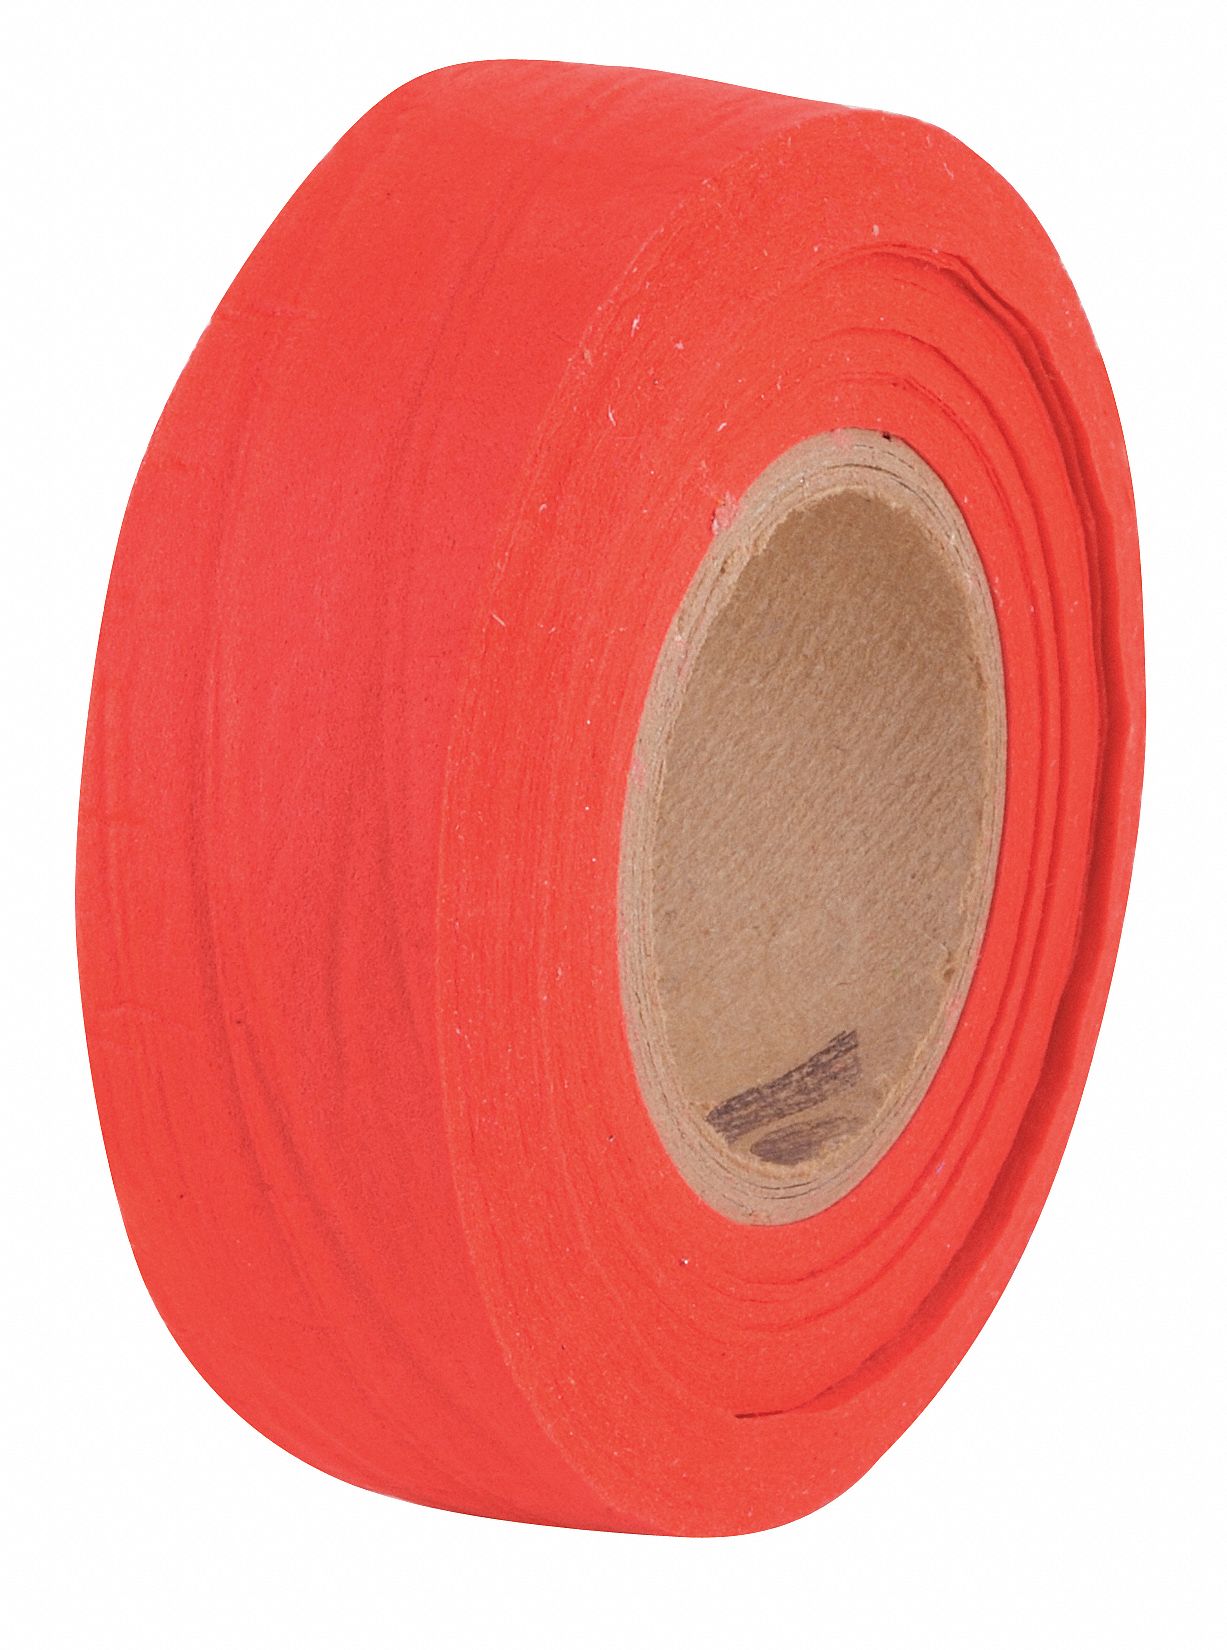 PRESCO PRODUCTS CO CKWR-200 Flagging Tape,White/Red,300ft x 1-3/8 In 